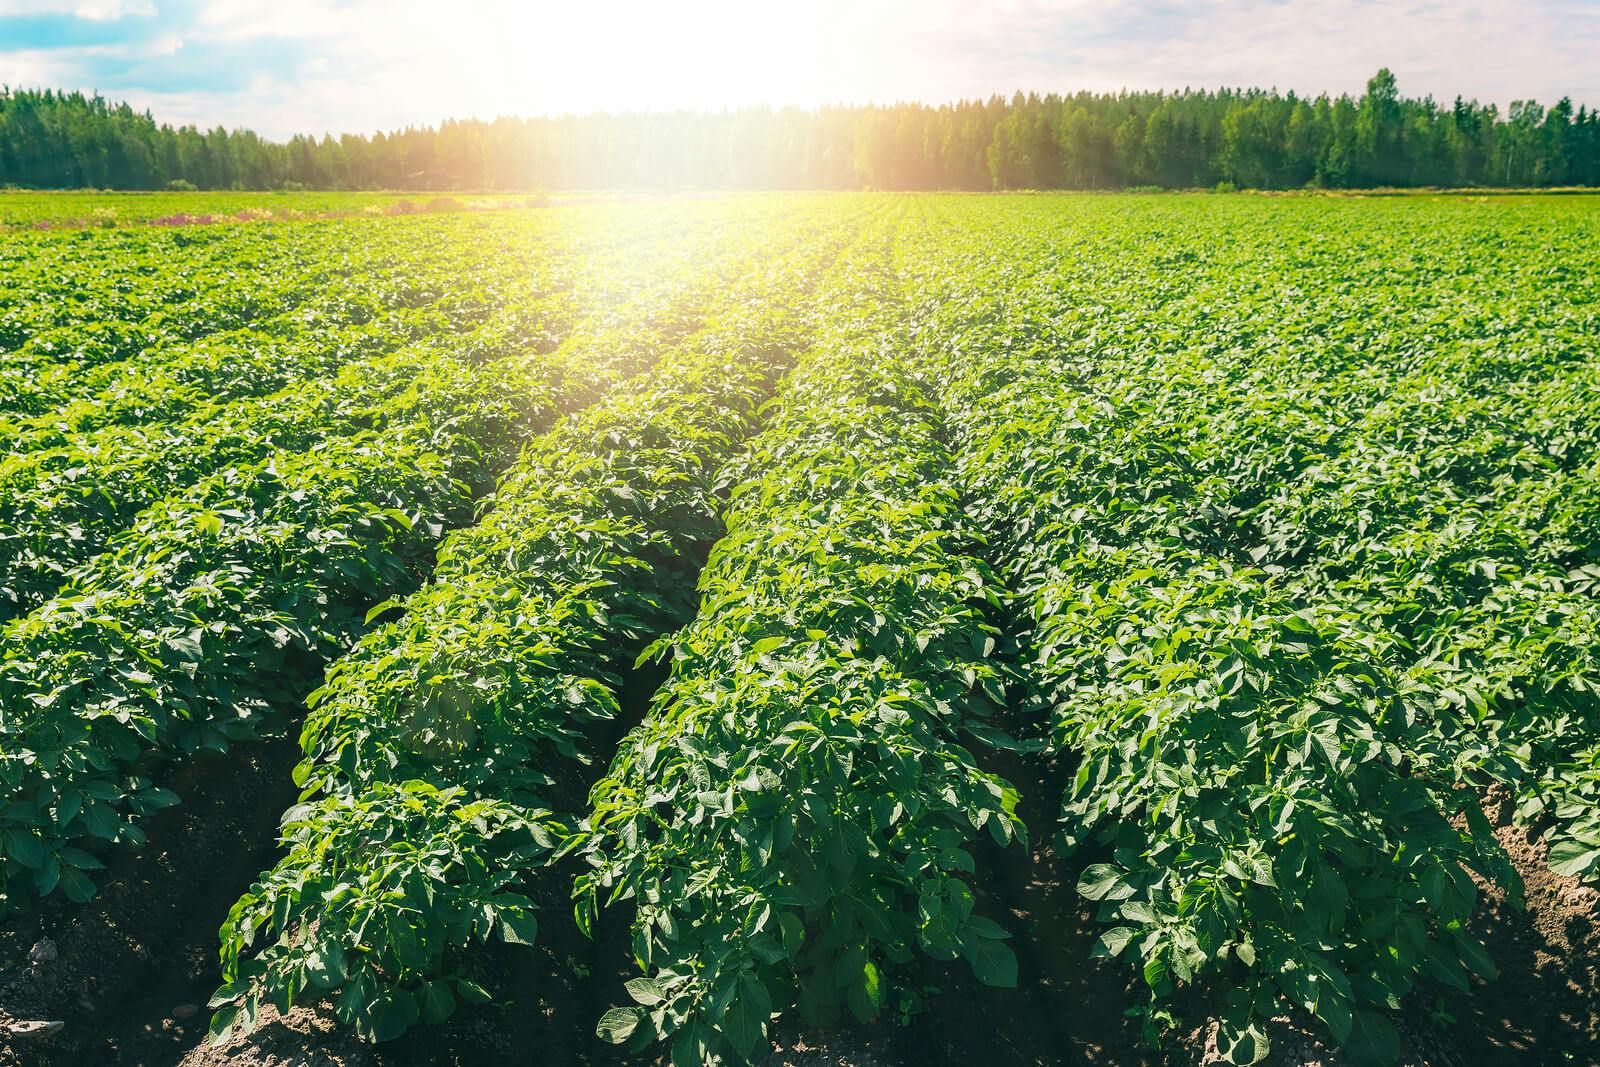 Healthy green rows of potato plants thrive in the sunshine on a blue-skied day